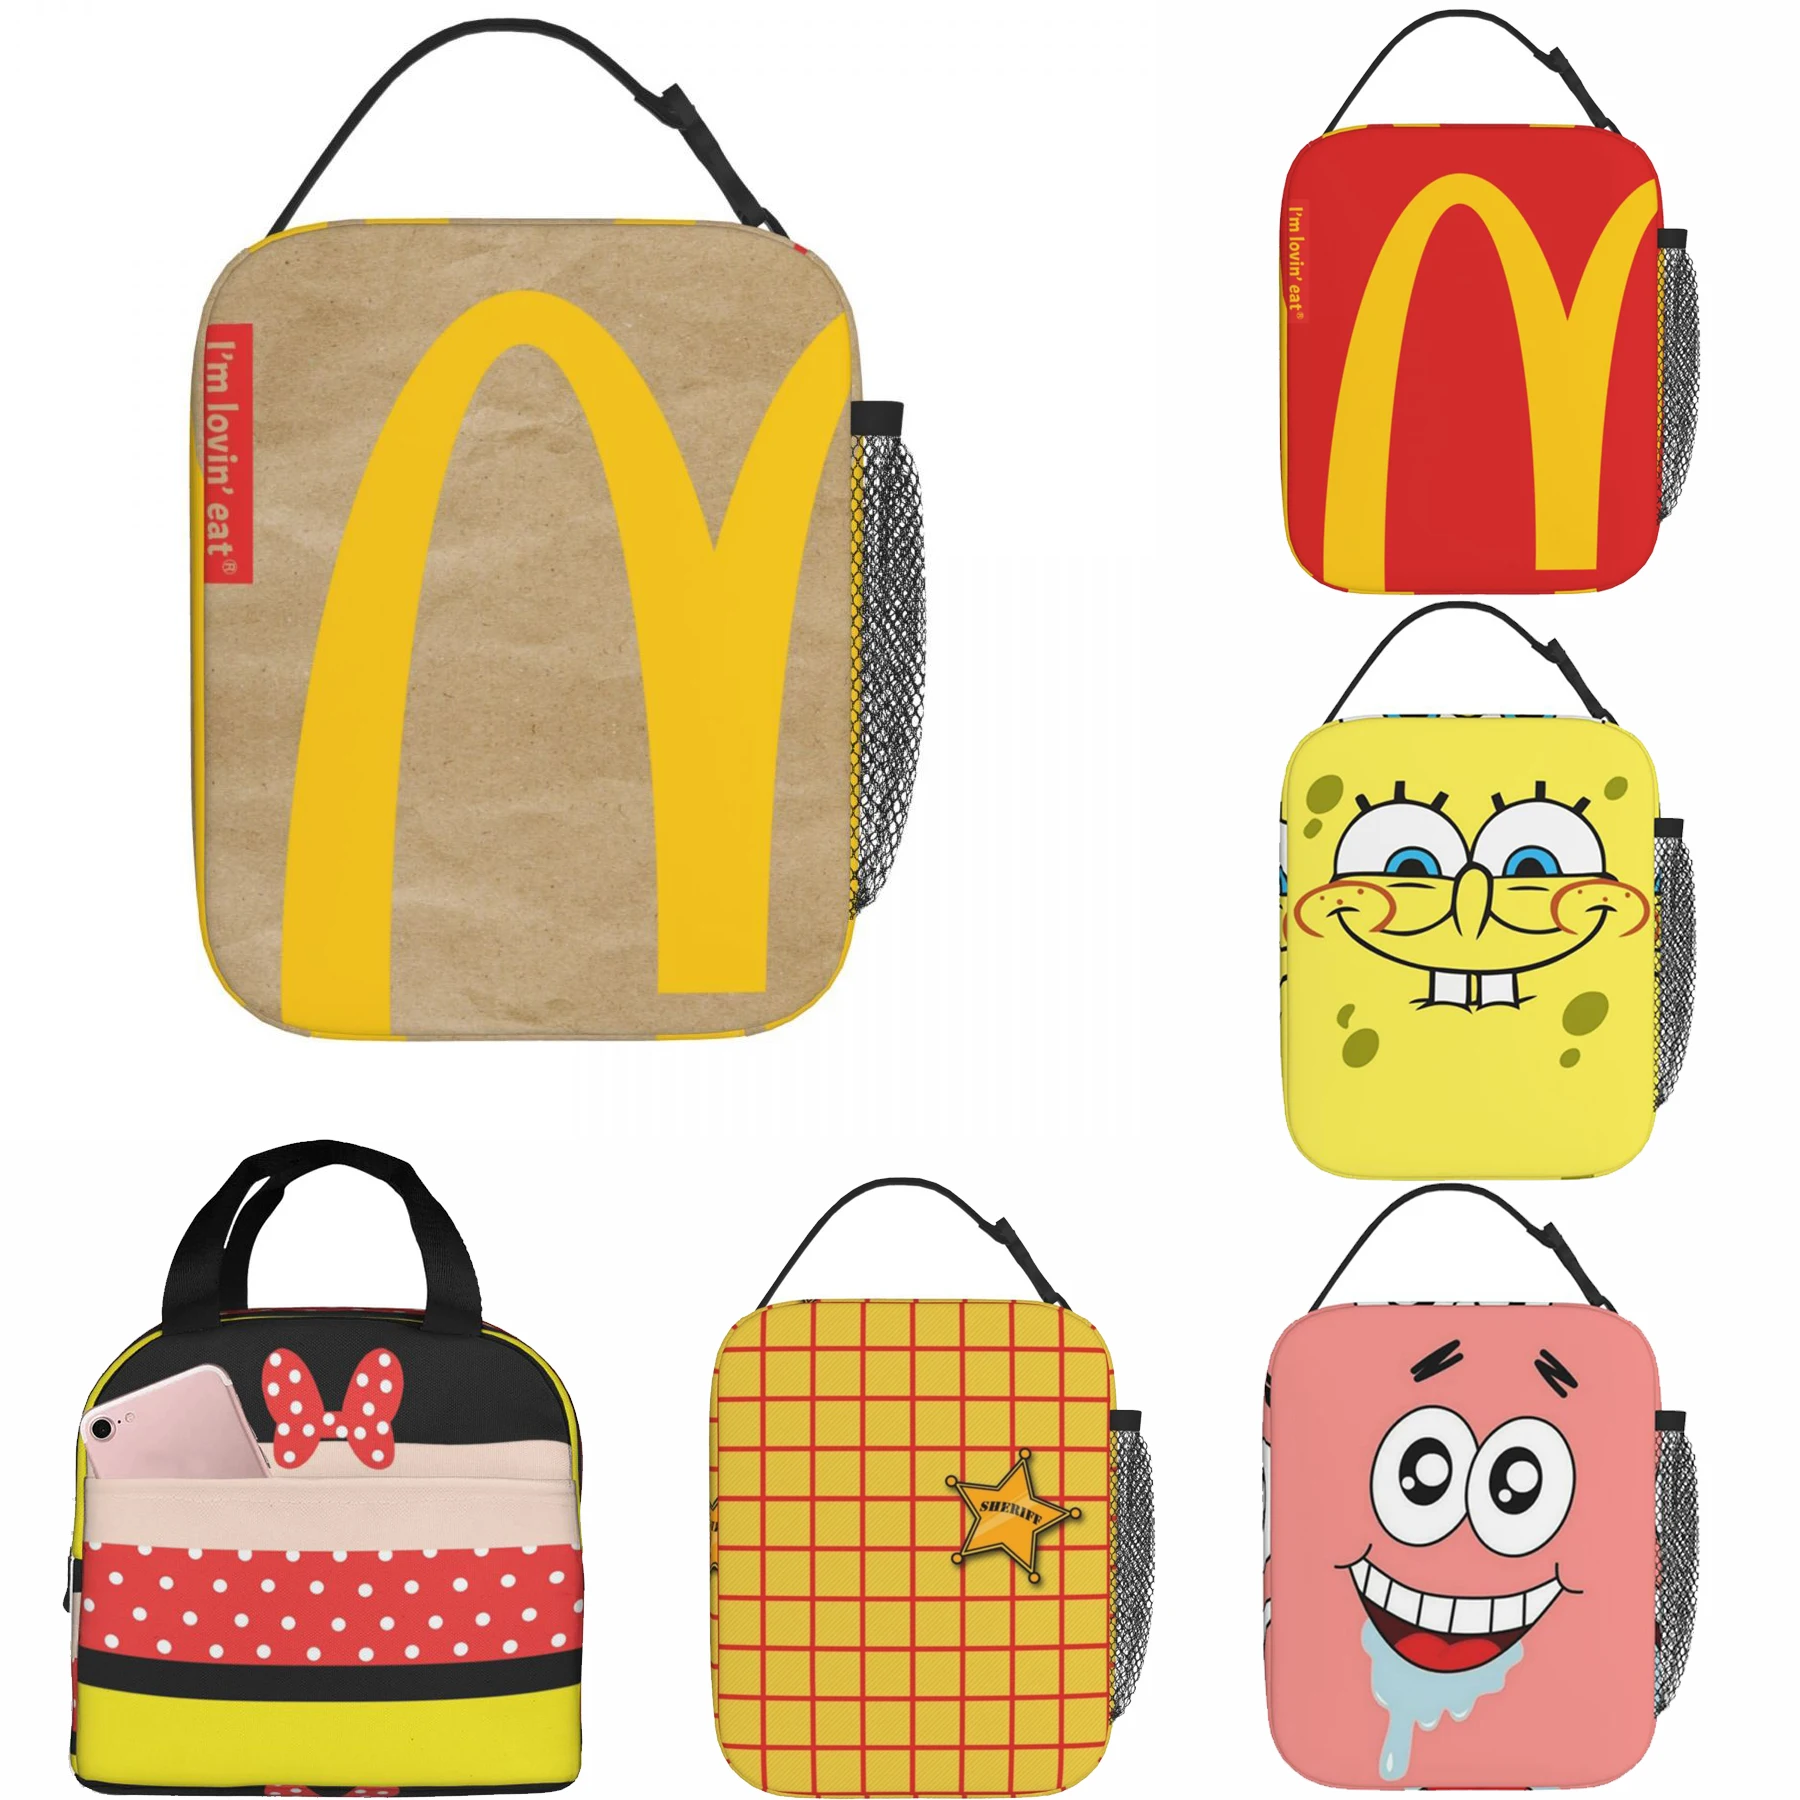 Funny I'm Lovin Eat Thermal Insulated Lunch Bag New Arrival Bento Box Thermal Cooler Lunch Box Fun Design